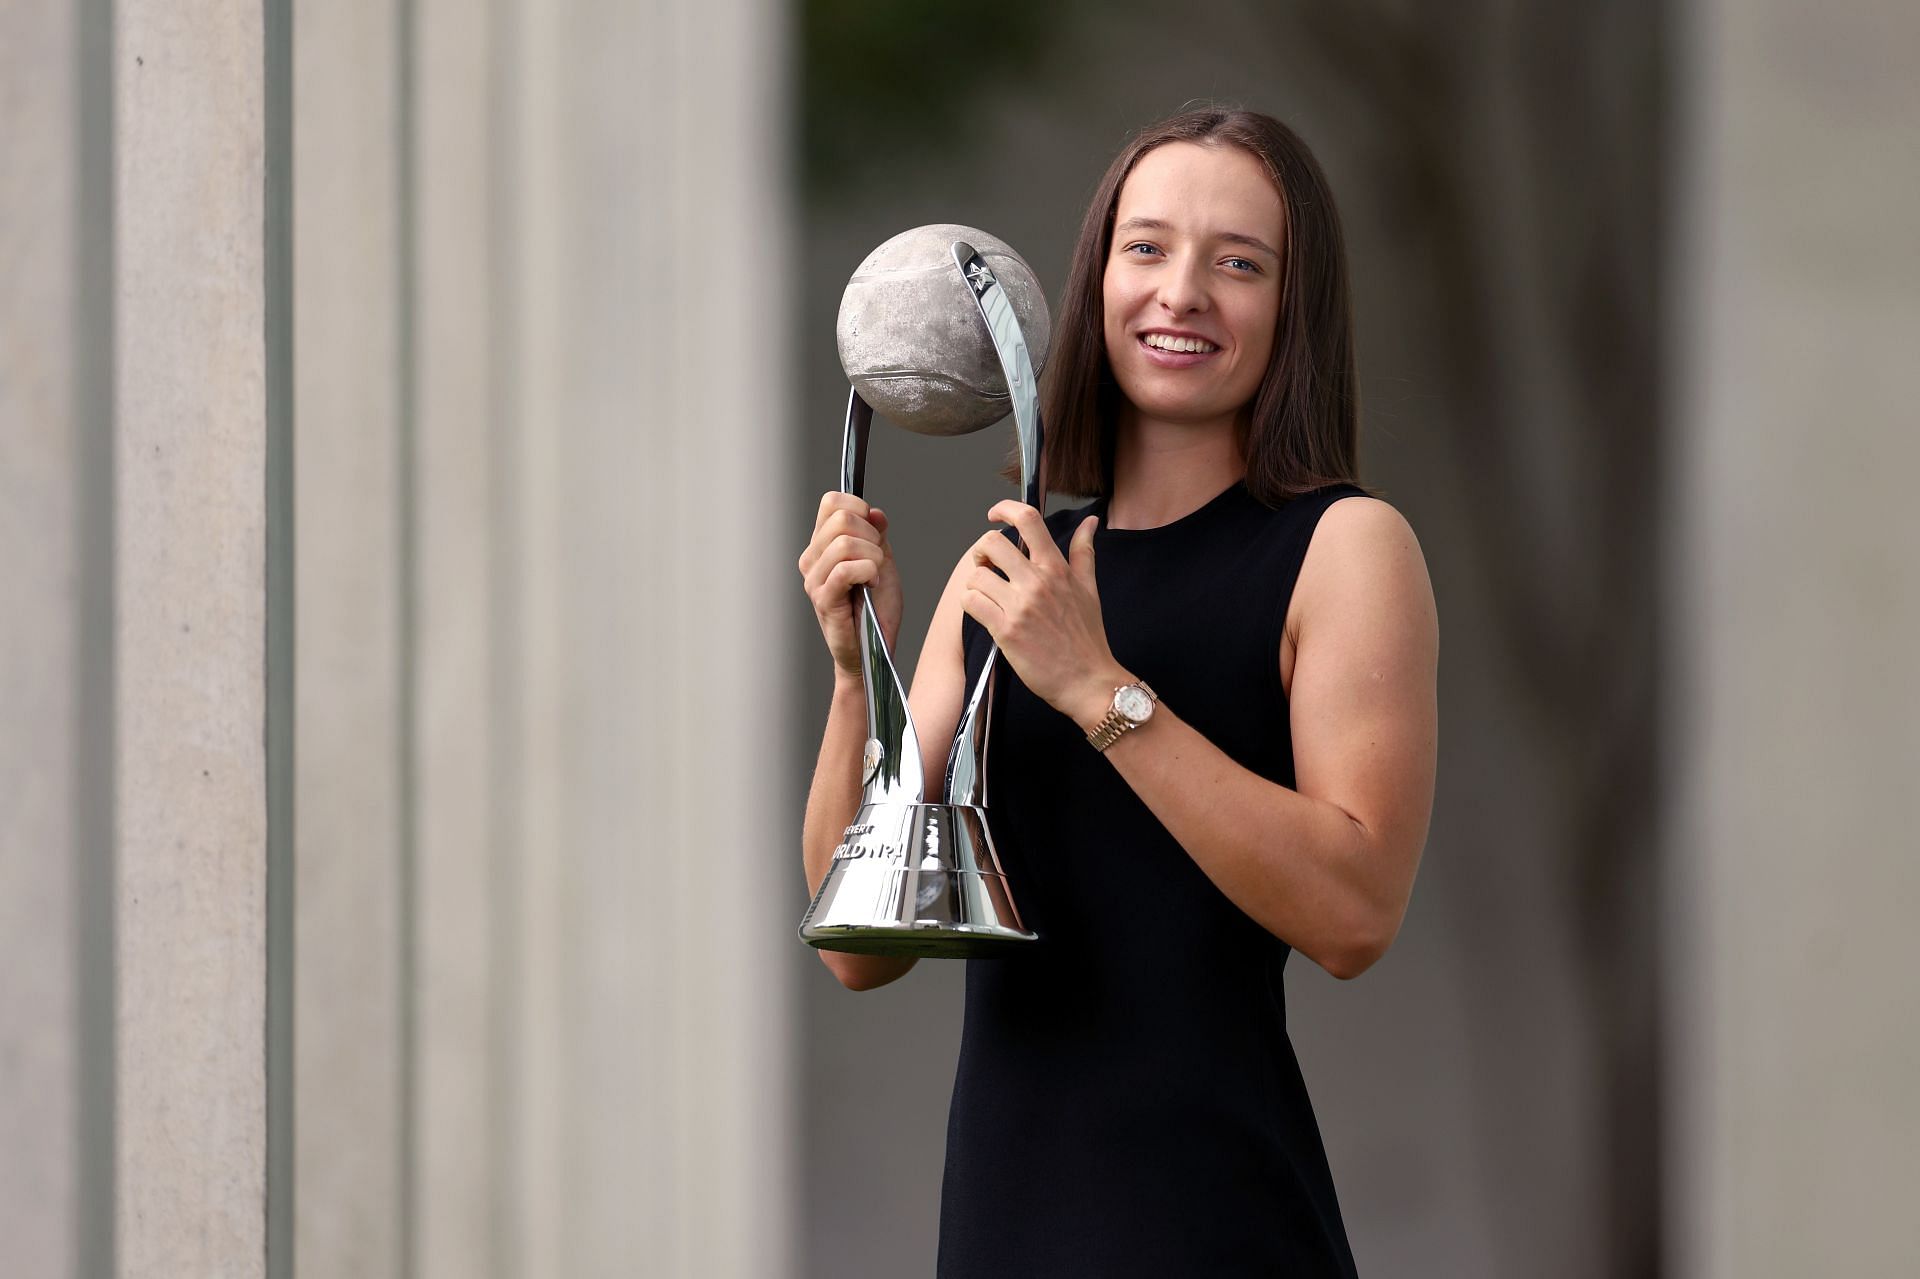 Iga Swiatek poses with the Chris Evert WTA Singles Year-End World No. 1 trophy.